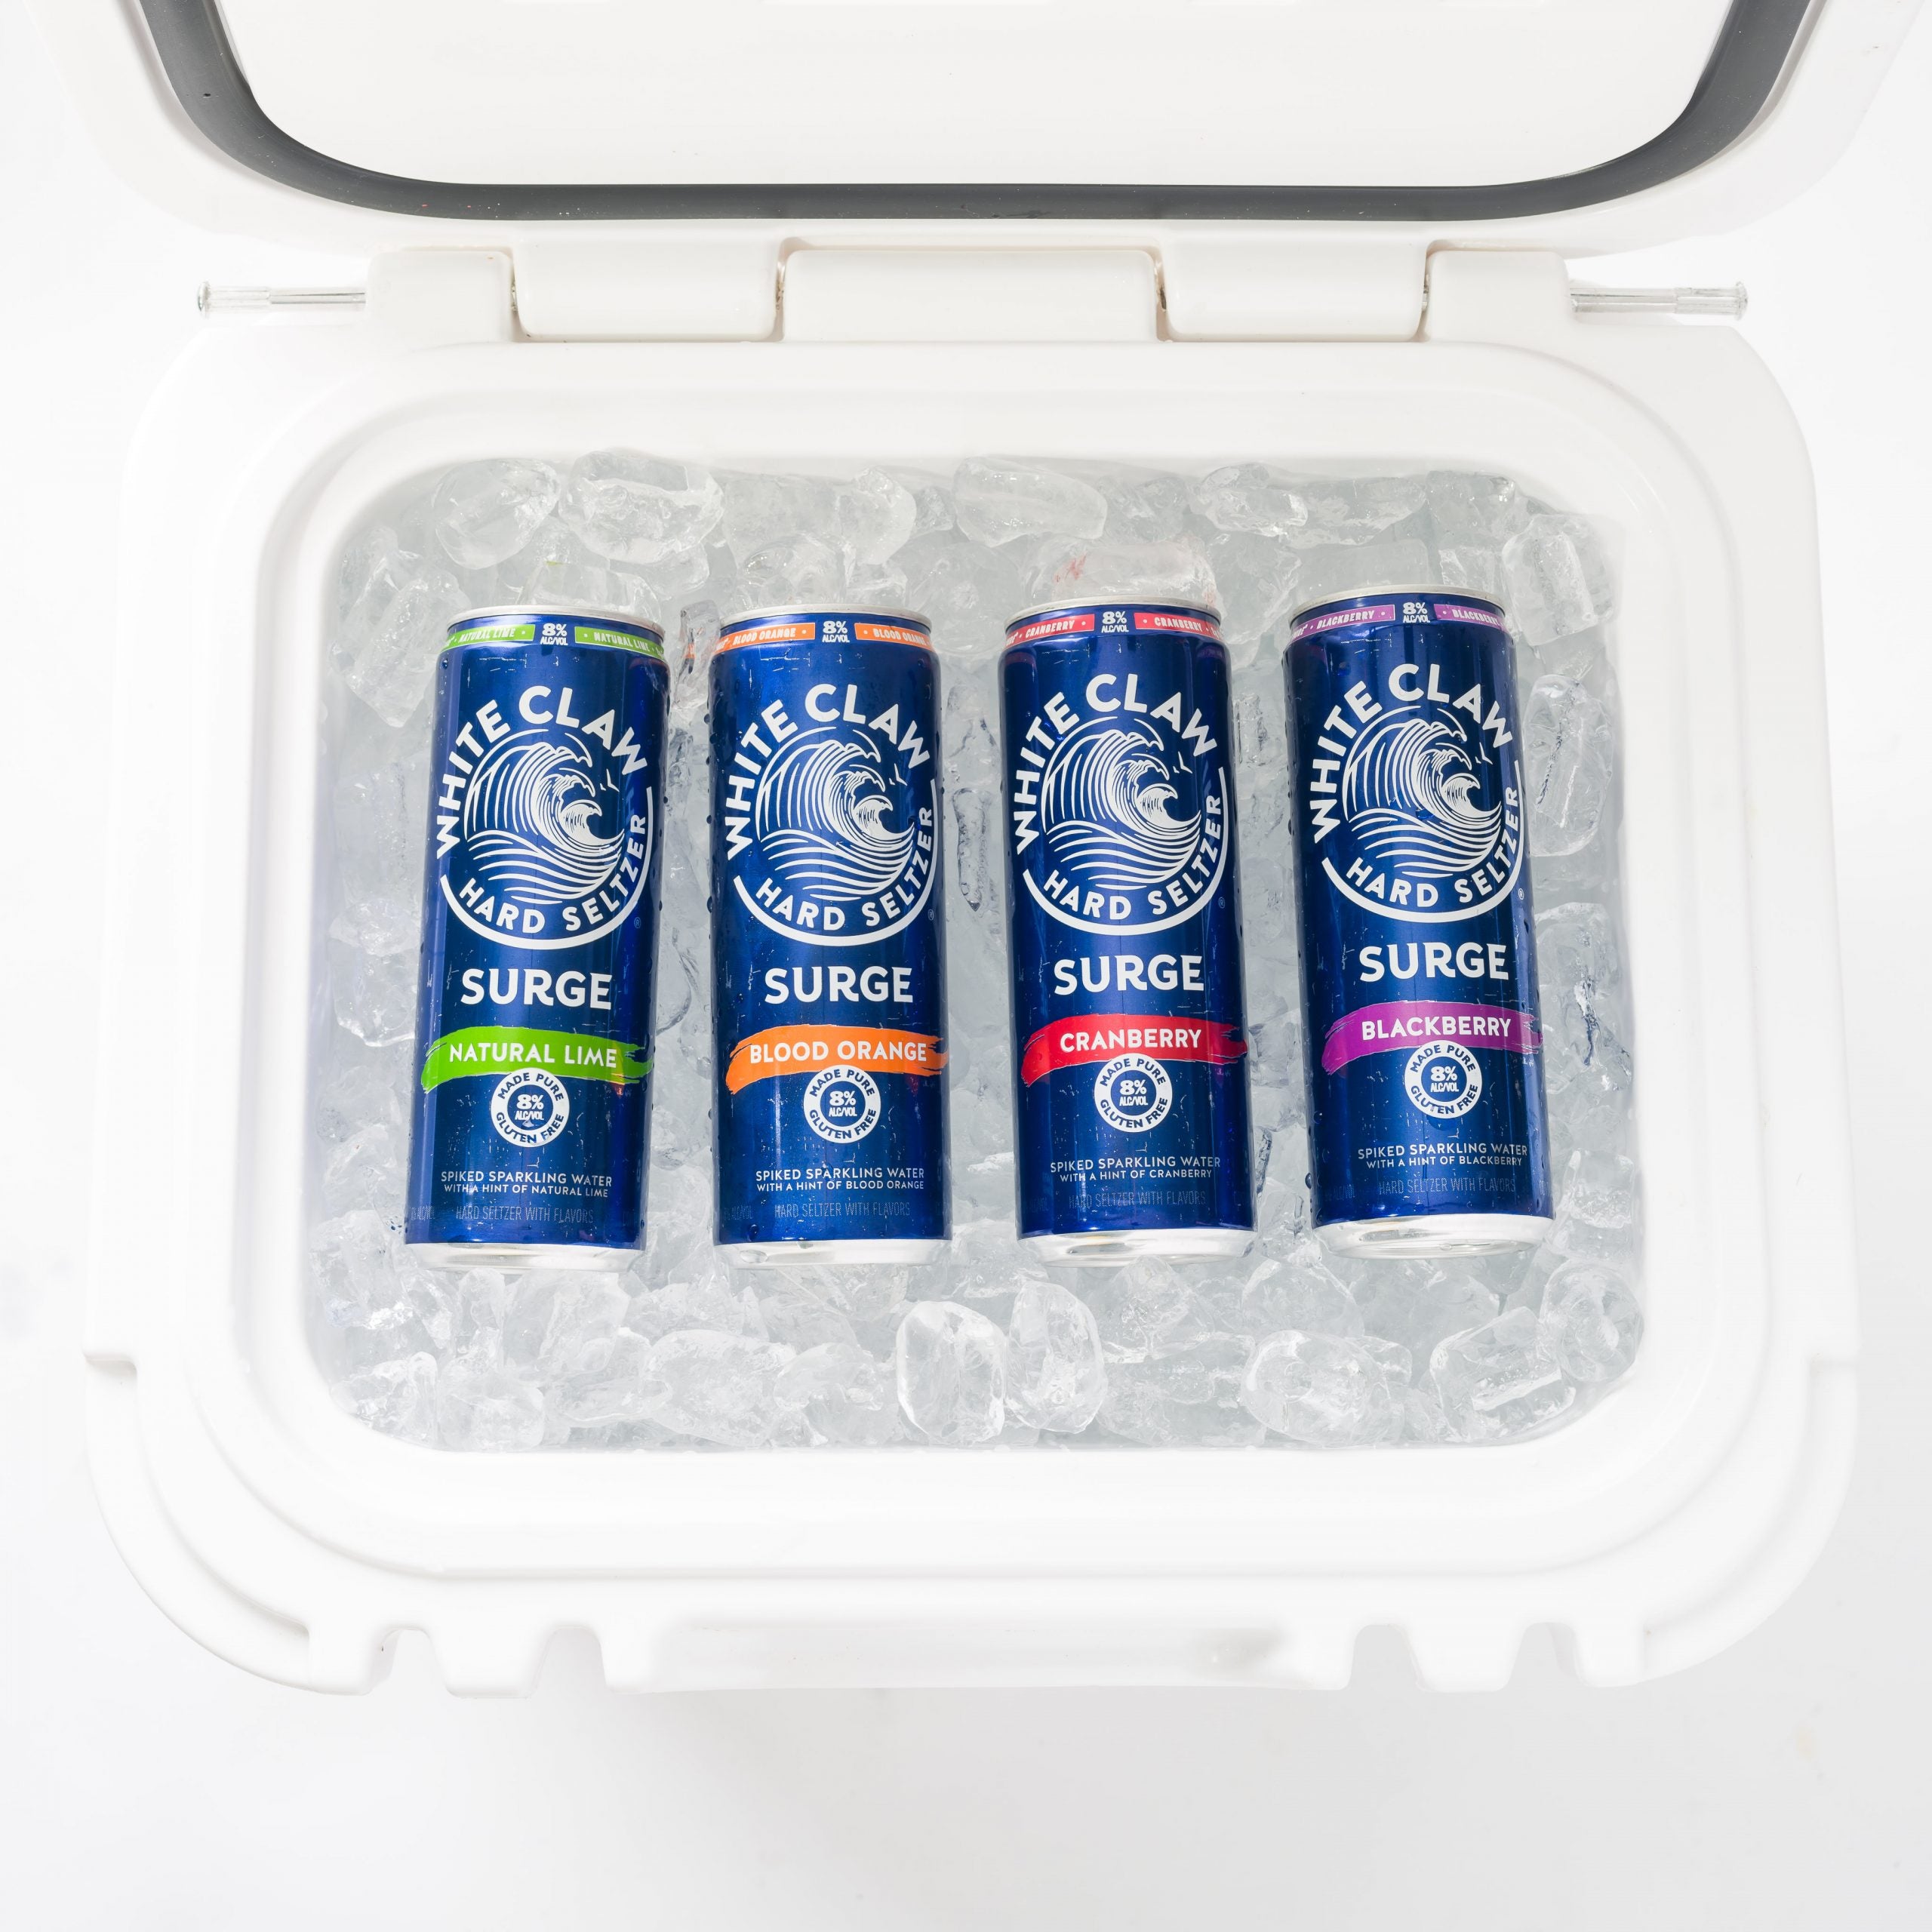 Let's Toast: White Claw Hard Seltzer Surge